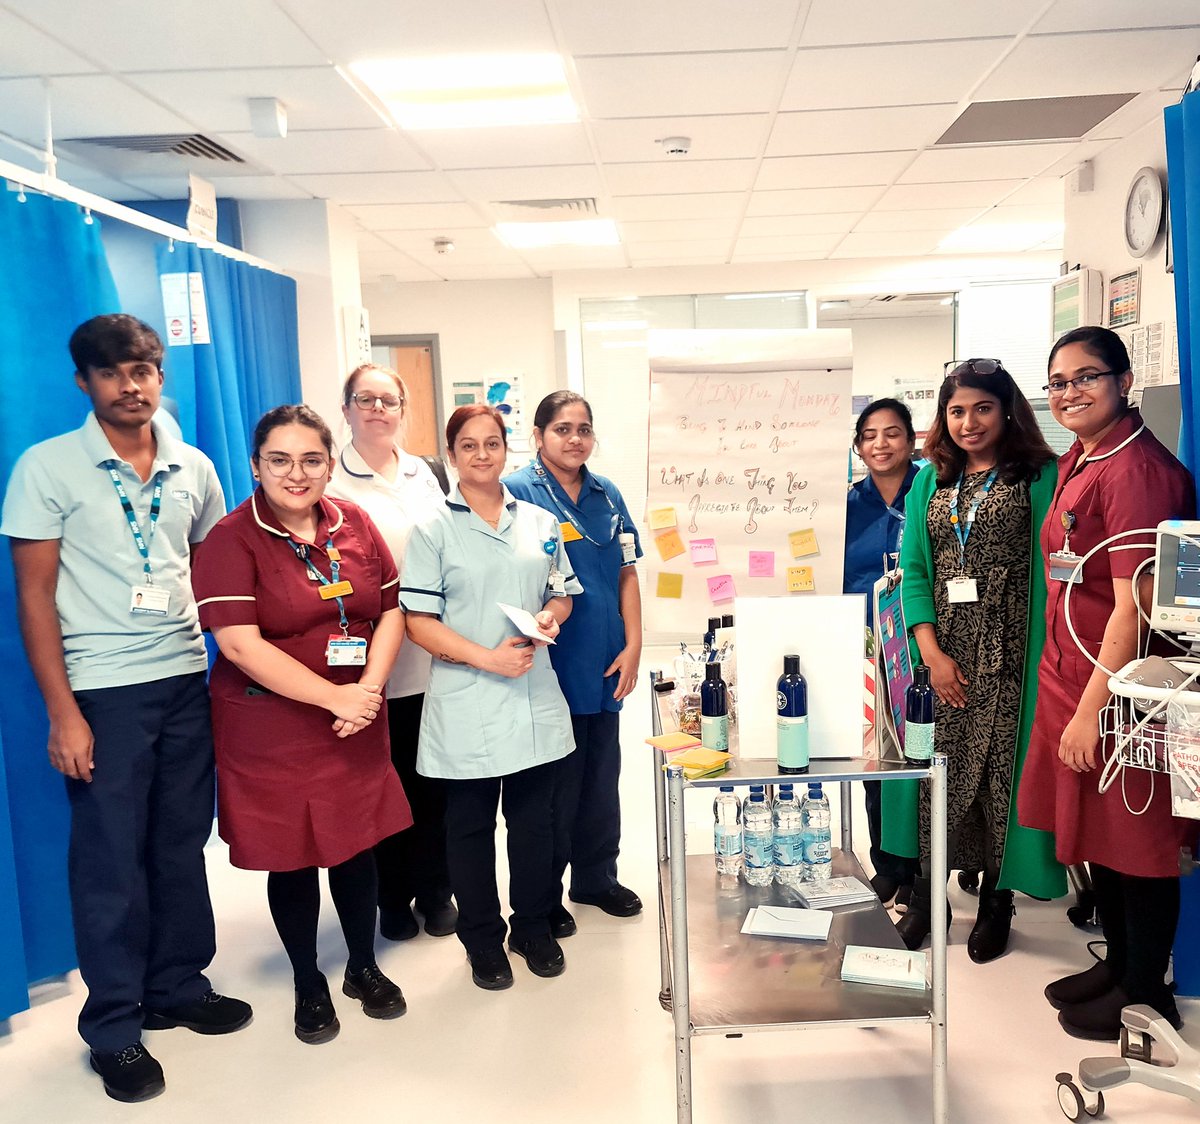 Thank you @ShikhaPDN and @elizabethkurian for organising ' Wellbeing week ' in ED. It was great to see all the smiles and engagement from the team🤩🤩.. @Gsep_ @NHSHarlow @pread152 @rubyhillinger @SHaWPAH1